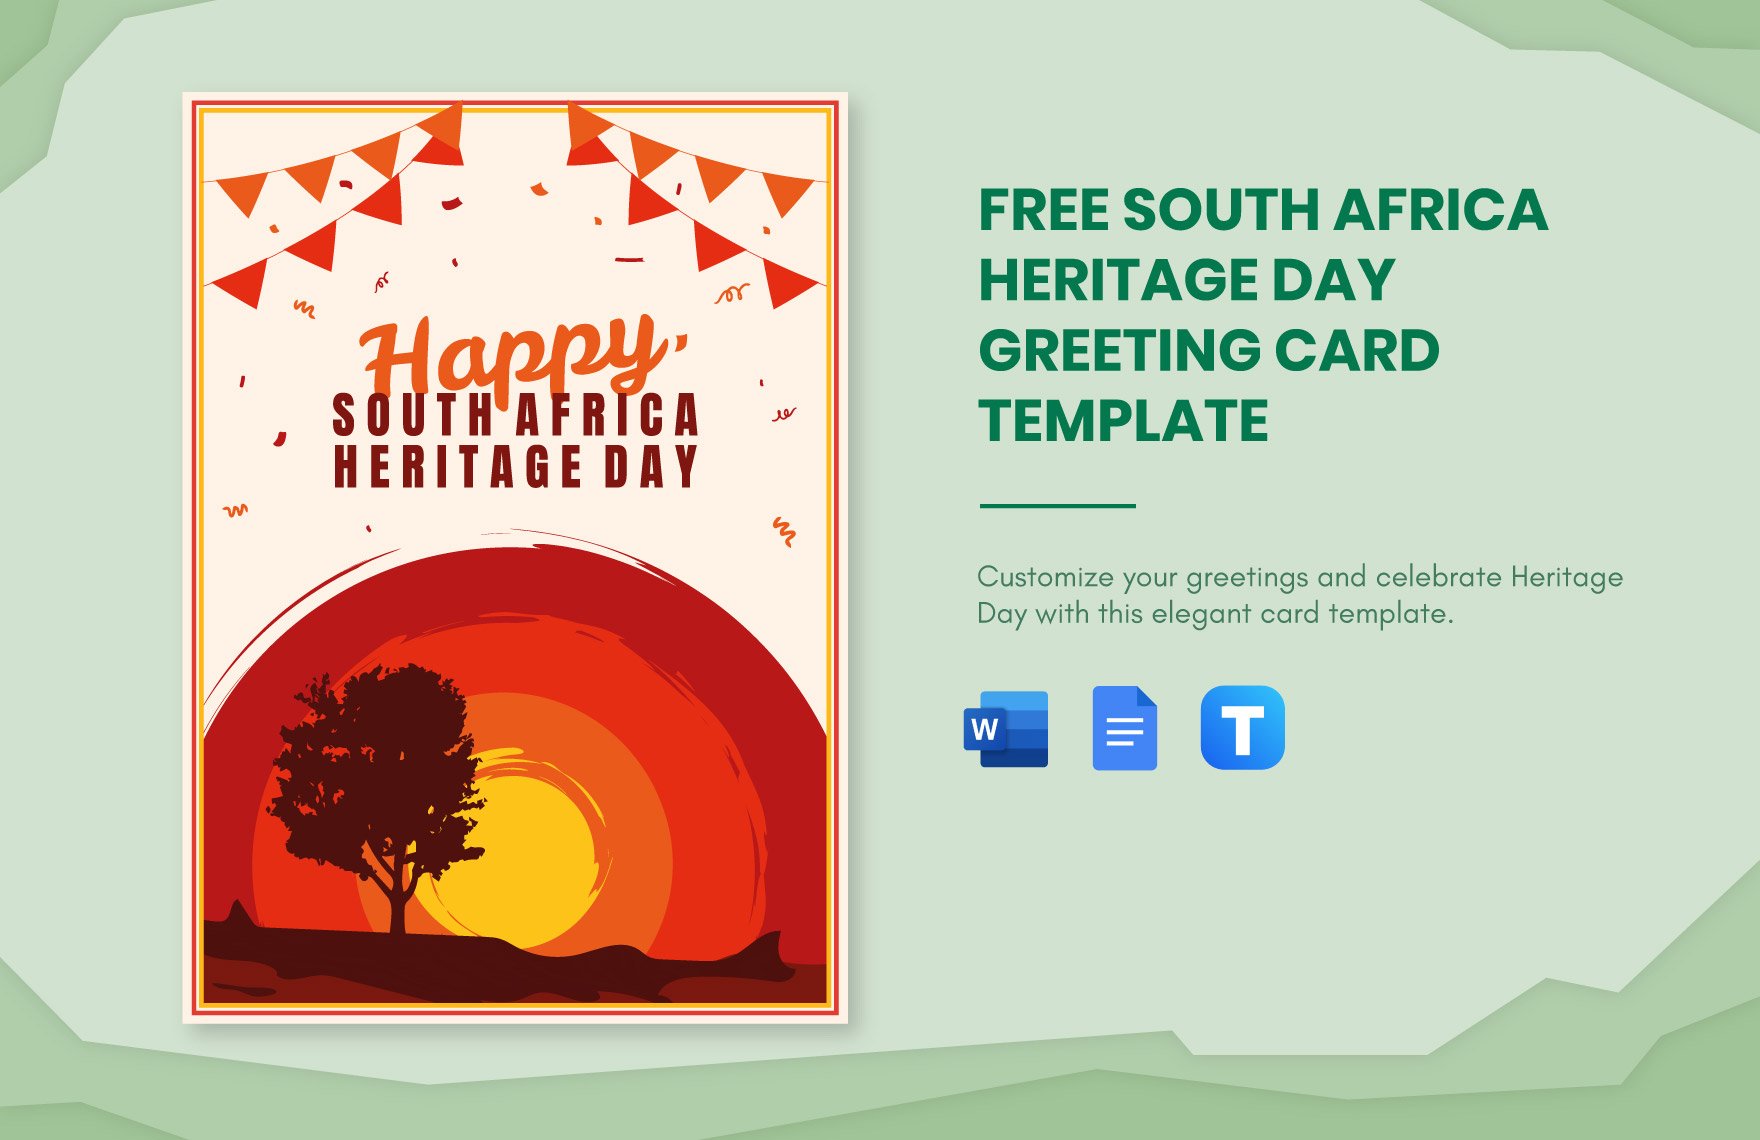 Free South Africa Heritage Day Greeting Card Template in Word, Google Docs